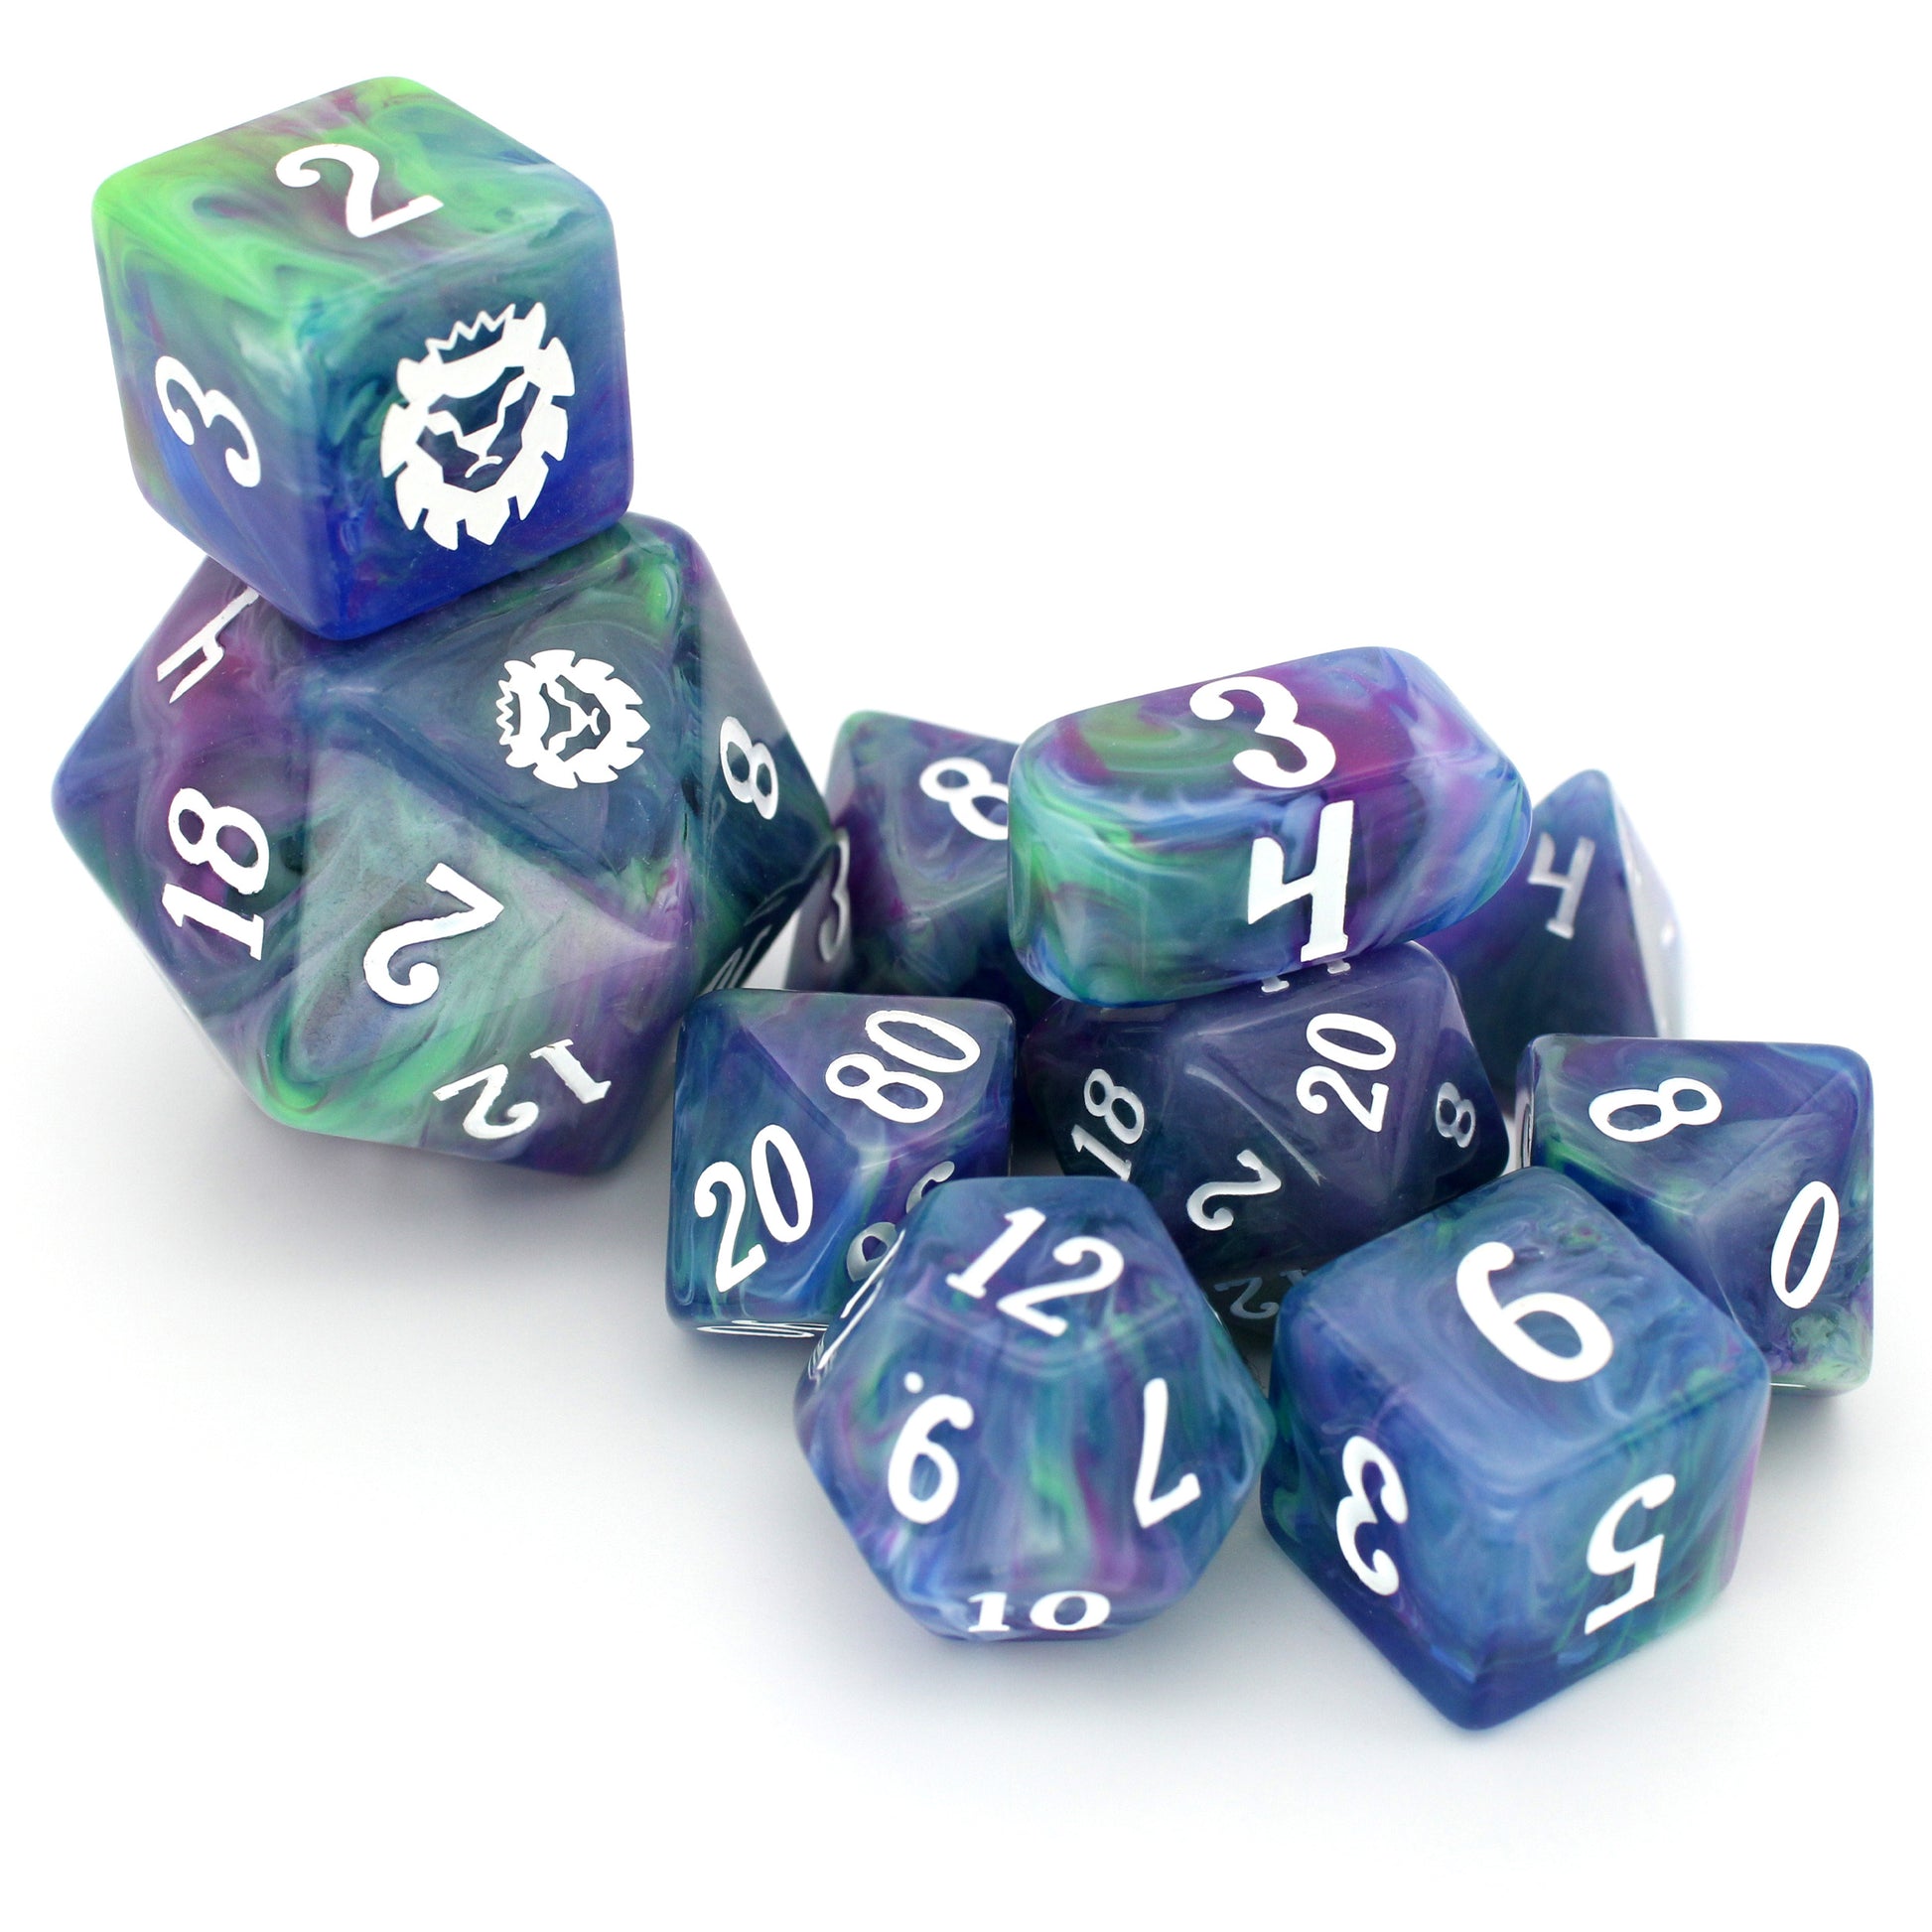 Space Opera is a 10-piece set of swirled with purple, green, white, and blue resin, inked in white.